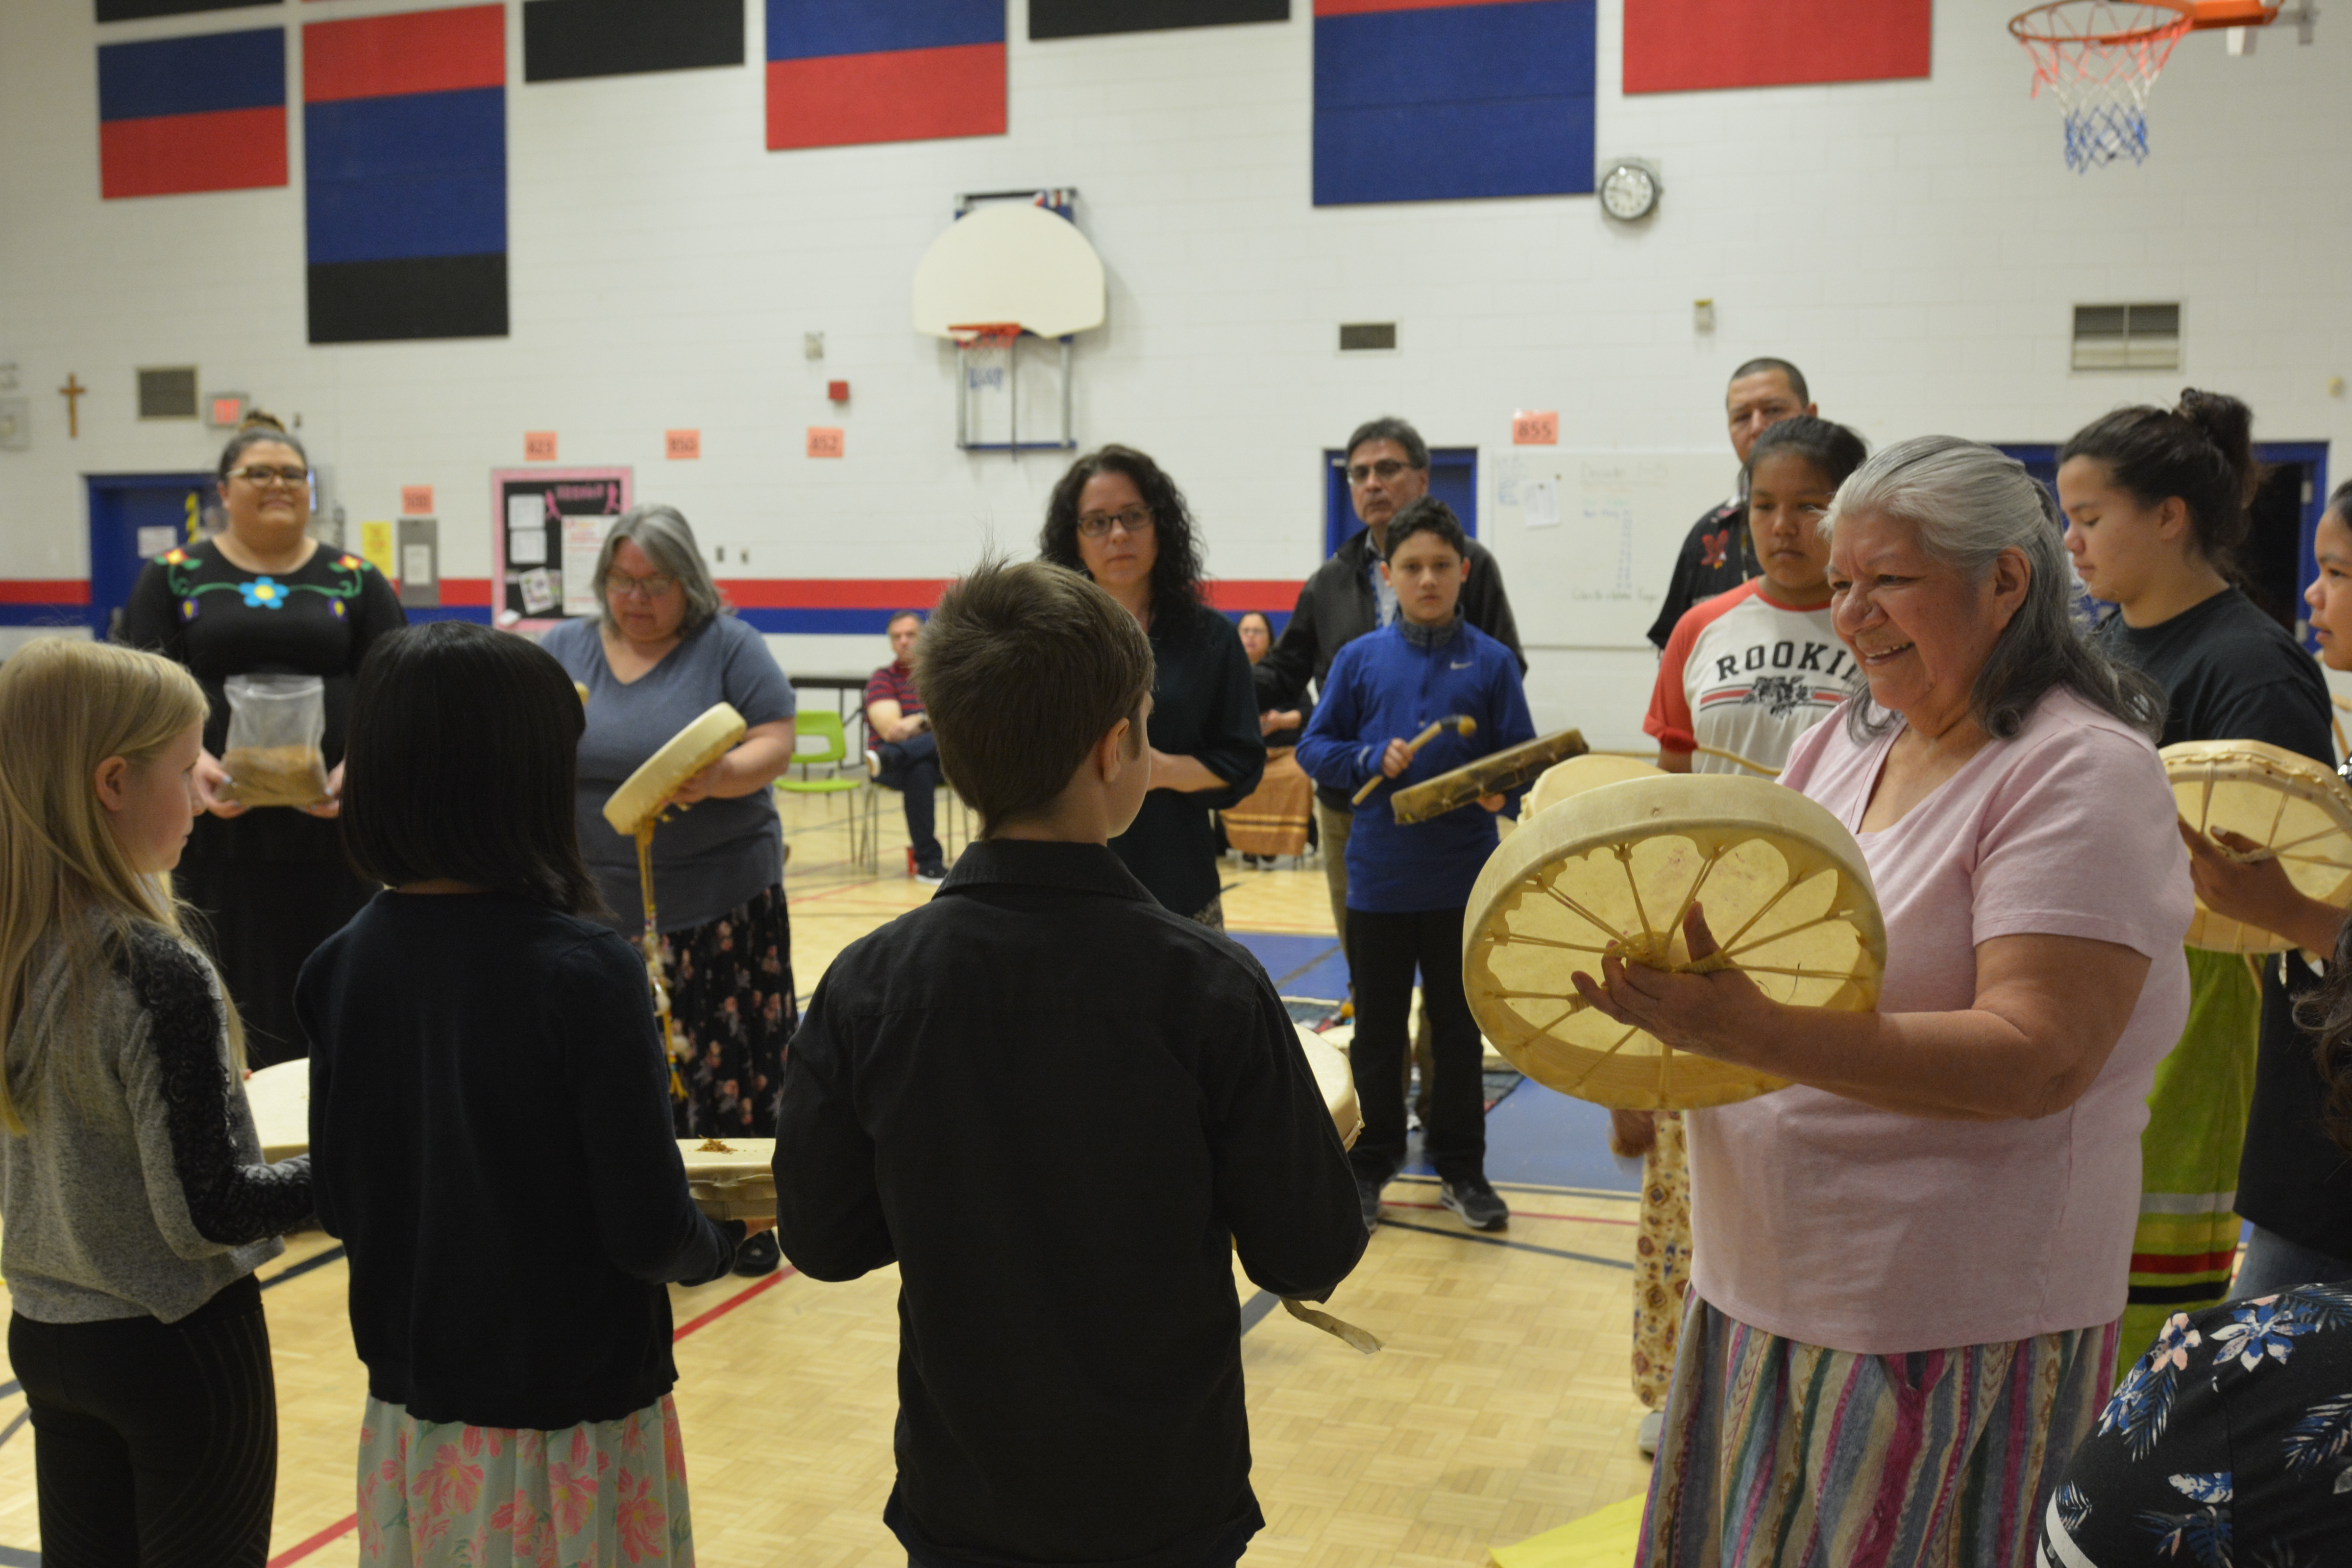 Three St. James student participate in the birth and feast celebration alongside Elders and community partners.